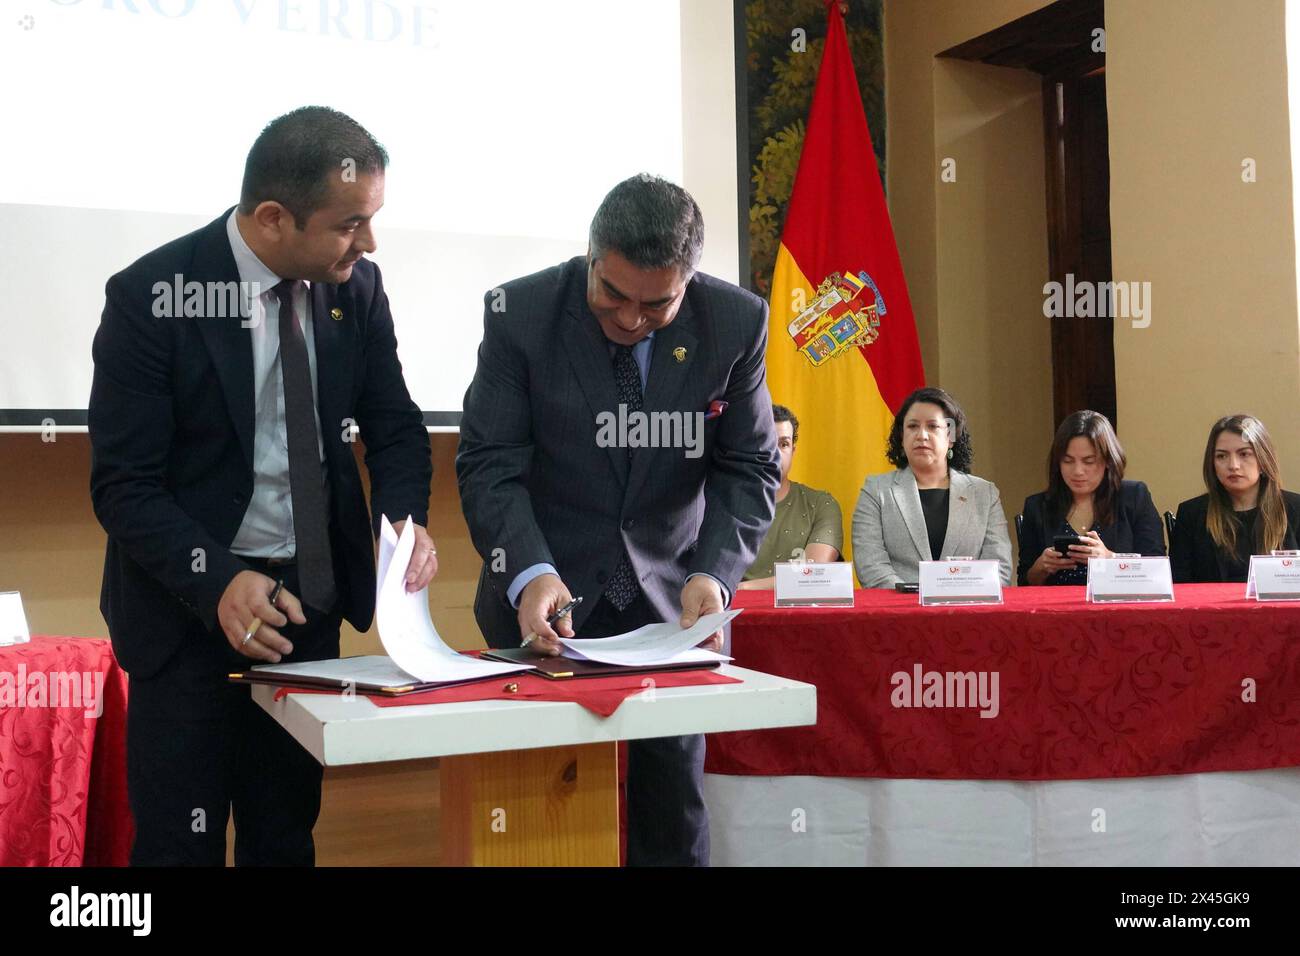 CUENCA SIGNS AGREEMENT HOTEL COMPANIES Cuenca, Ecuador April 30, 2024 This morning in the Teatrina of the Prefecture of Azuay was developed the signing of agreements for the practical training of students of what will be the career of Higher University Technology in Gastronomy, Dual Mode, through the application of the Theoretical and Practical Curriculum Plan, according to the provisions of the Regulations of Academic Regime and the Regulations for Careers and Programs in Dual Mode The Catholic University of Cuenca, its Academic Unit of Higher Technical and Technological Training CatoTec, the Stock Photo